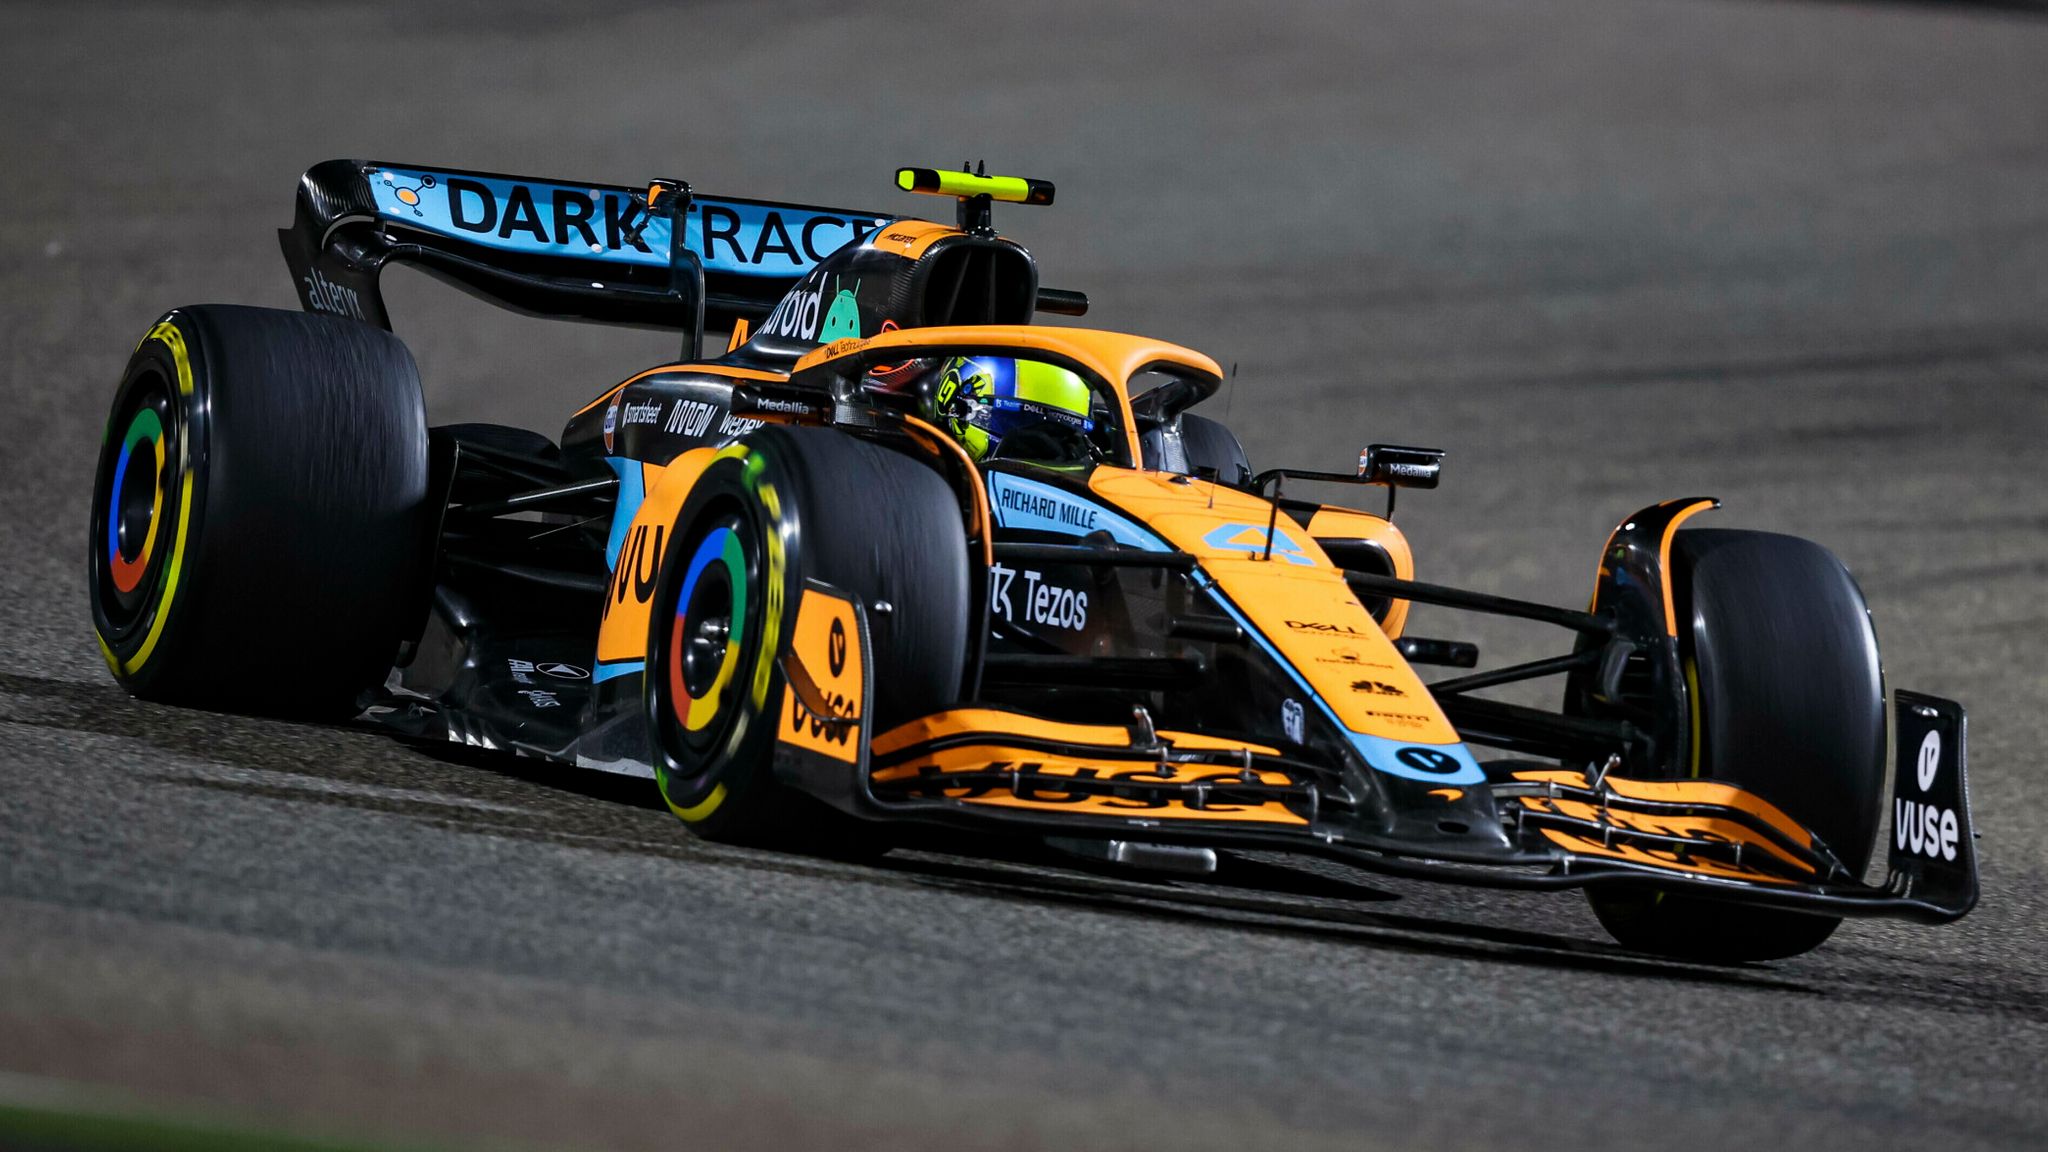 Lando Norris says it will not be 'a simple fix' as McLaren look to turnaround MCL36 after Bahrain challenges